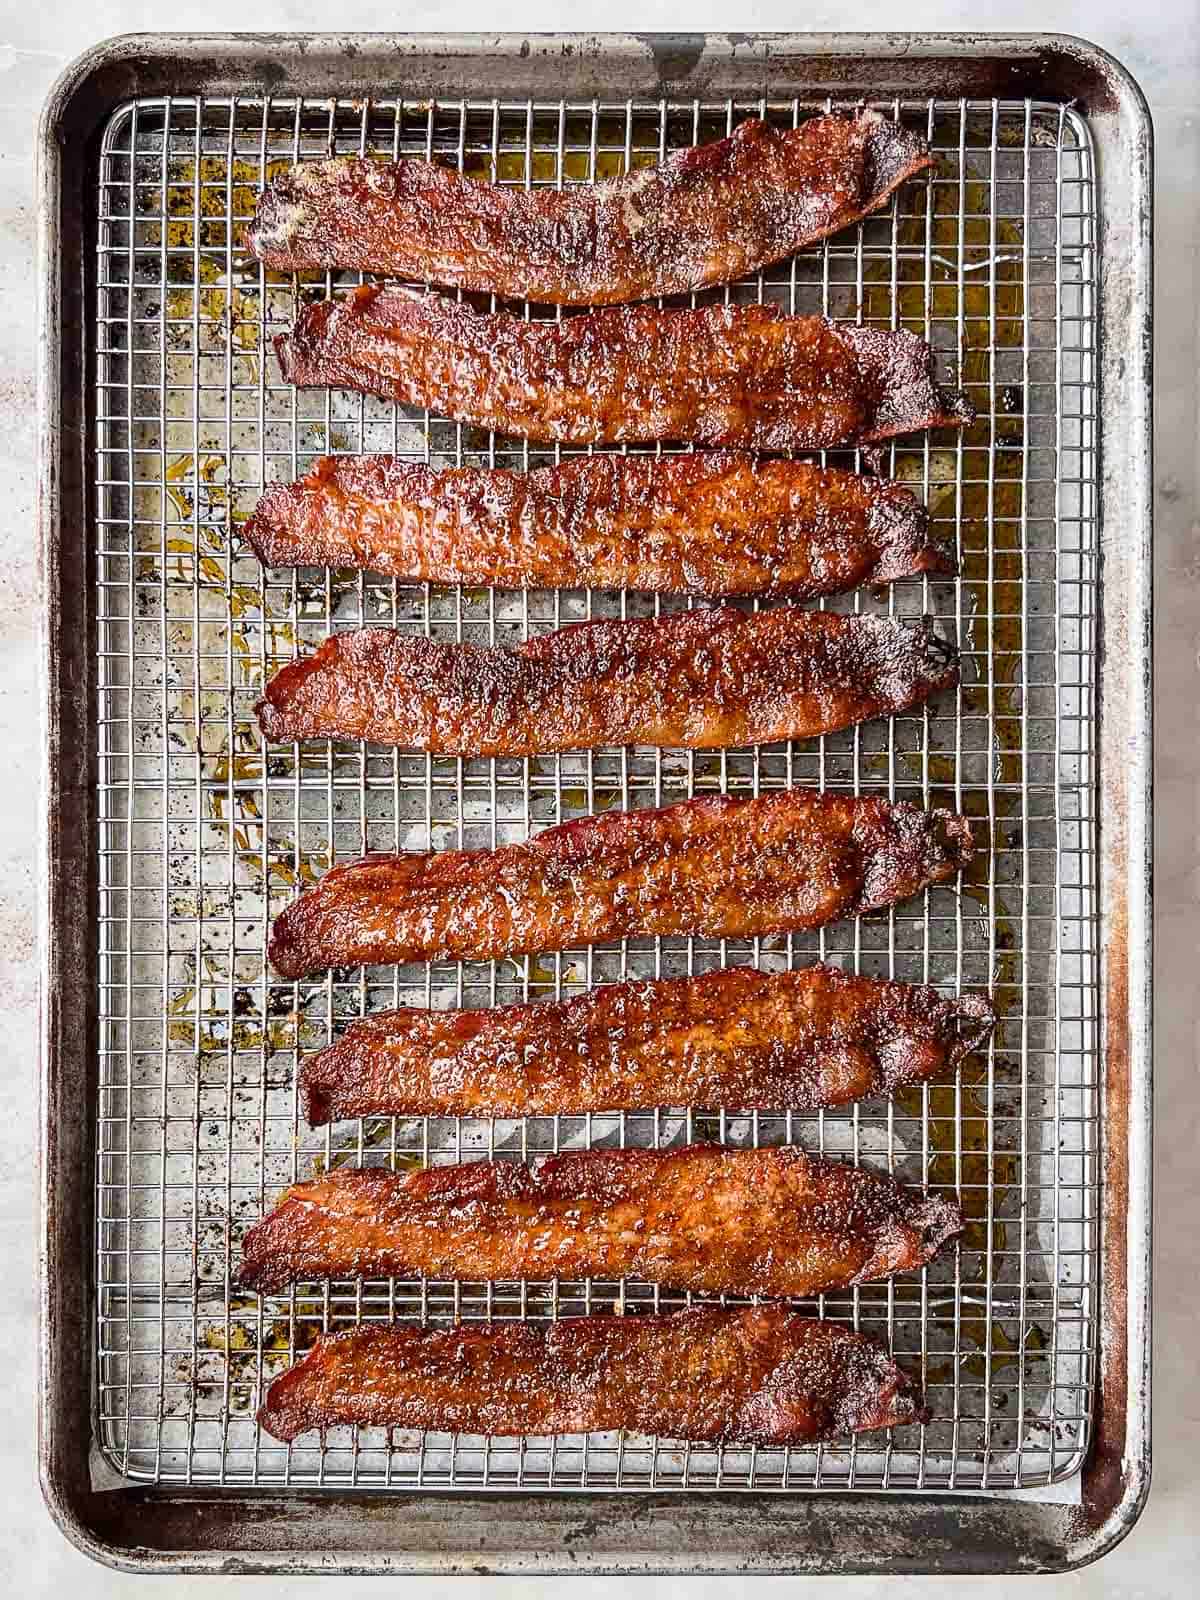 Slices of candied bacon on a backing rack.